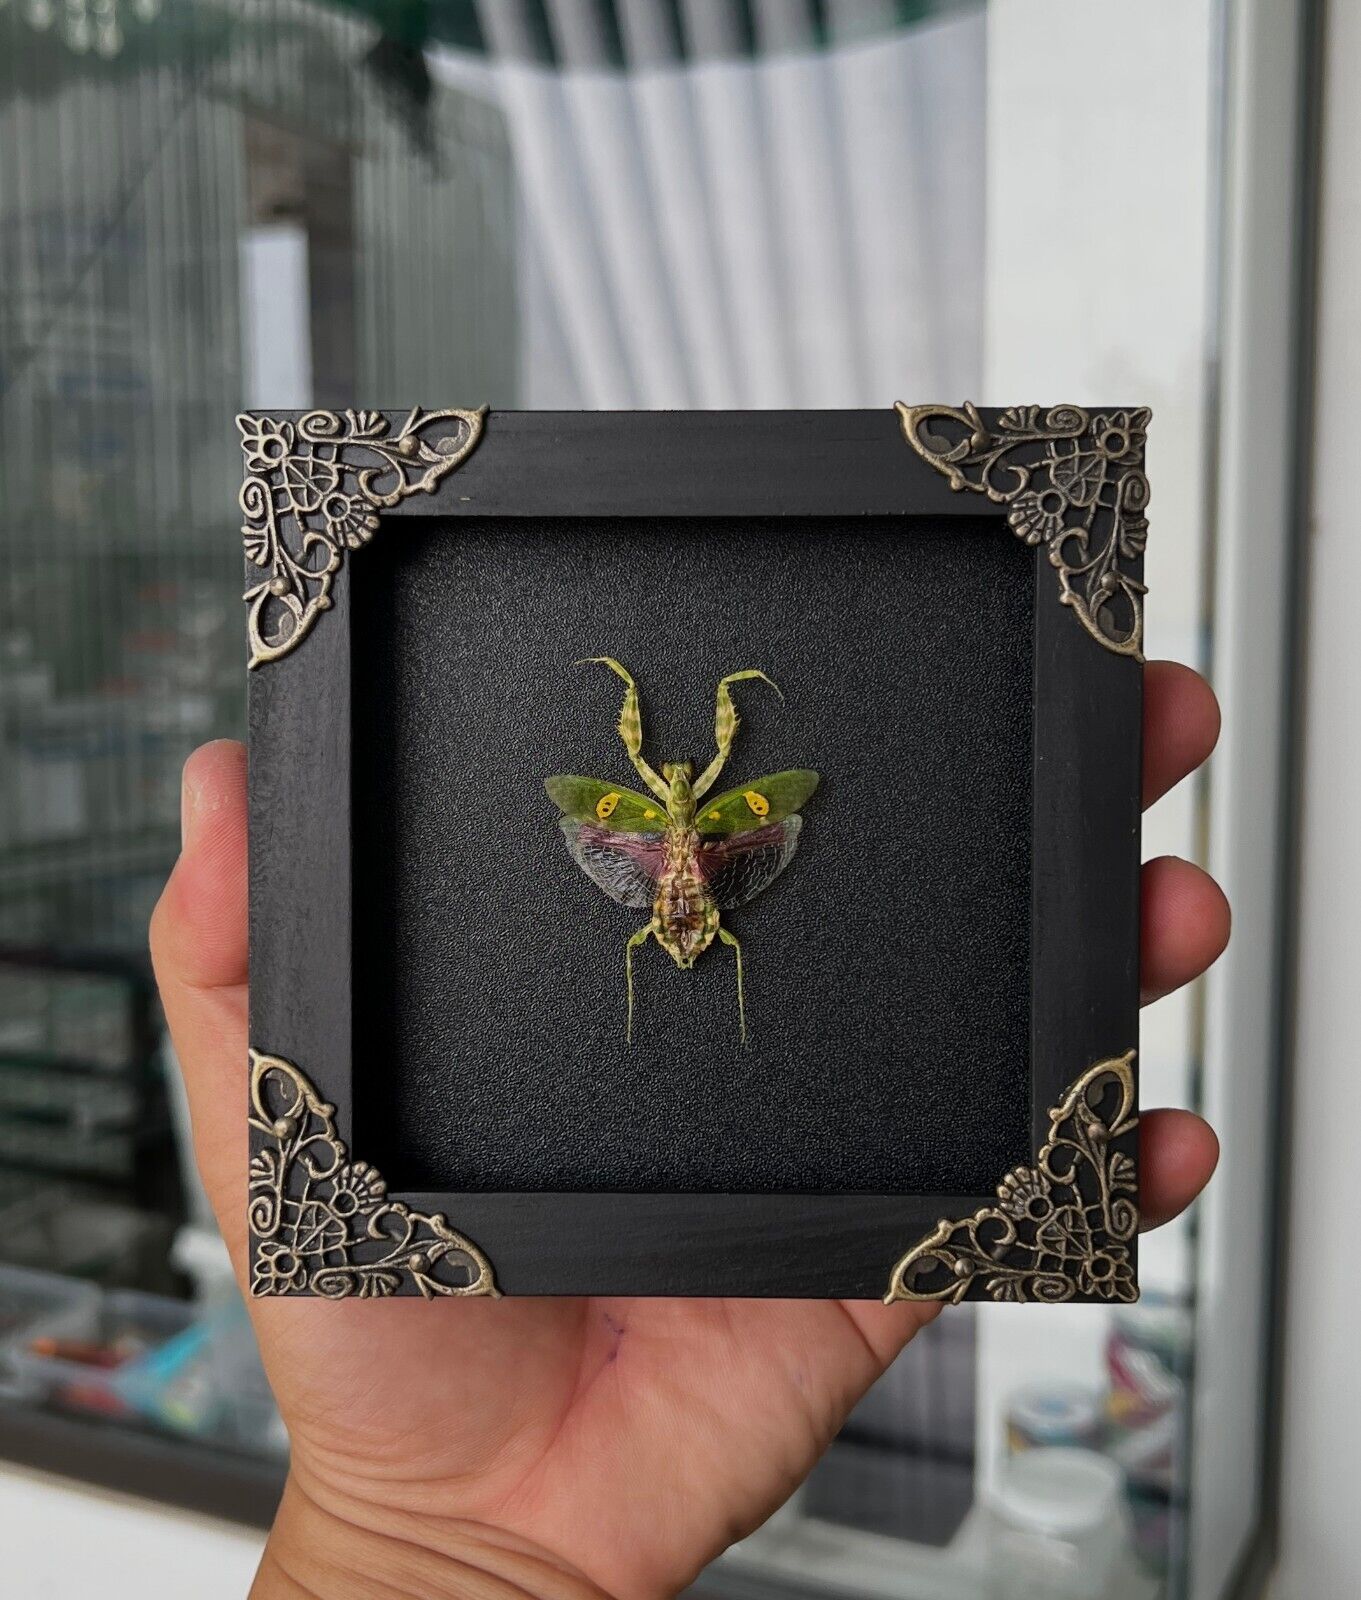 Real Framed Mantis Taxidermy Dried Insect Wall Hanging Decor Beetle Shadow Box